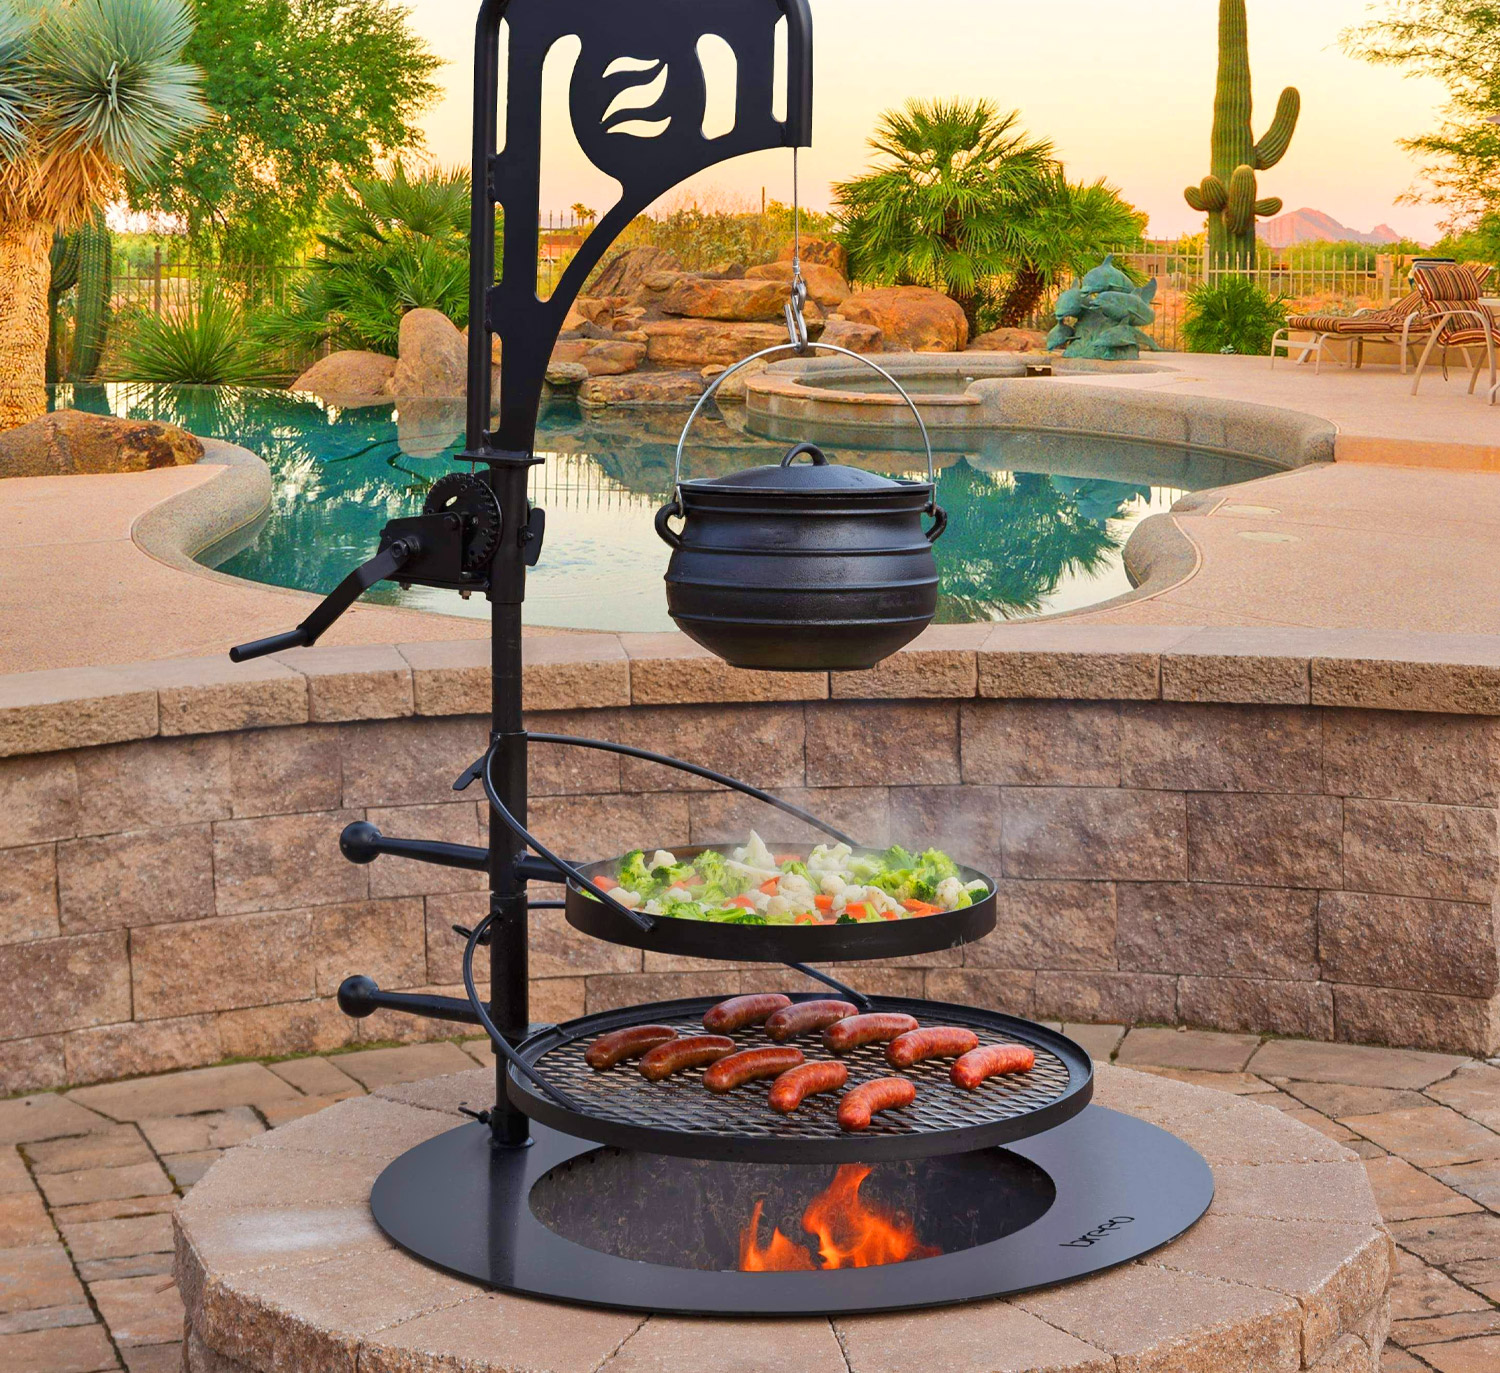 Fire Pit Into A Tiered Cooking Machine, Fire Pit Cooking Table